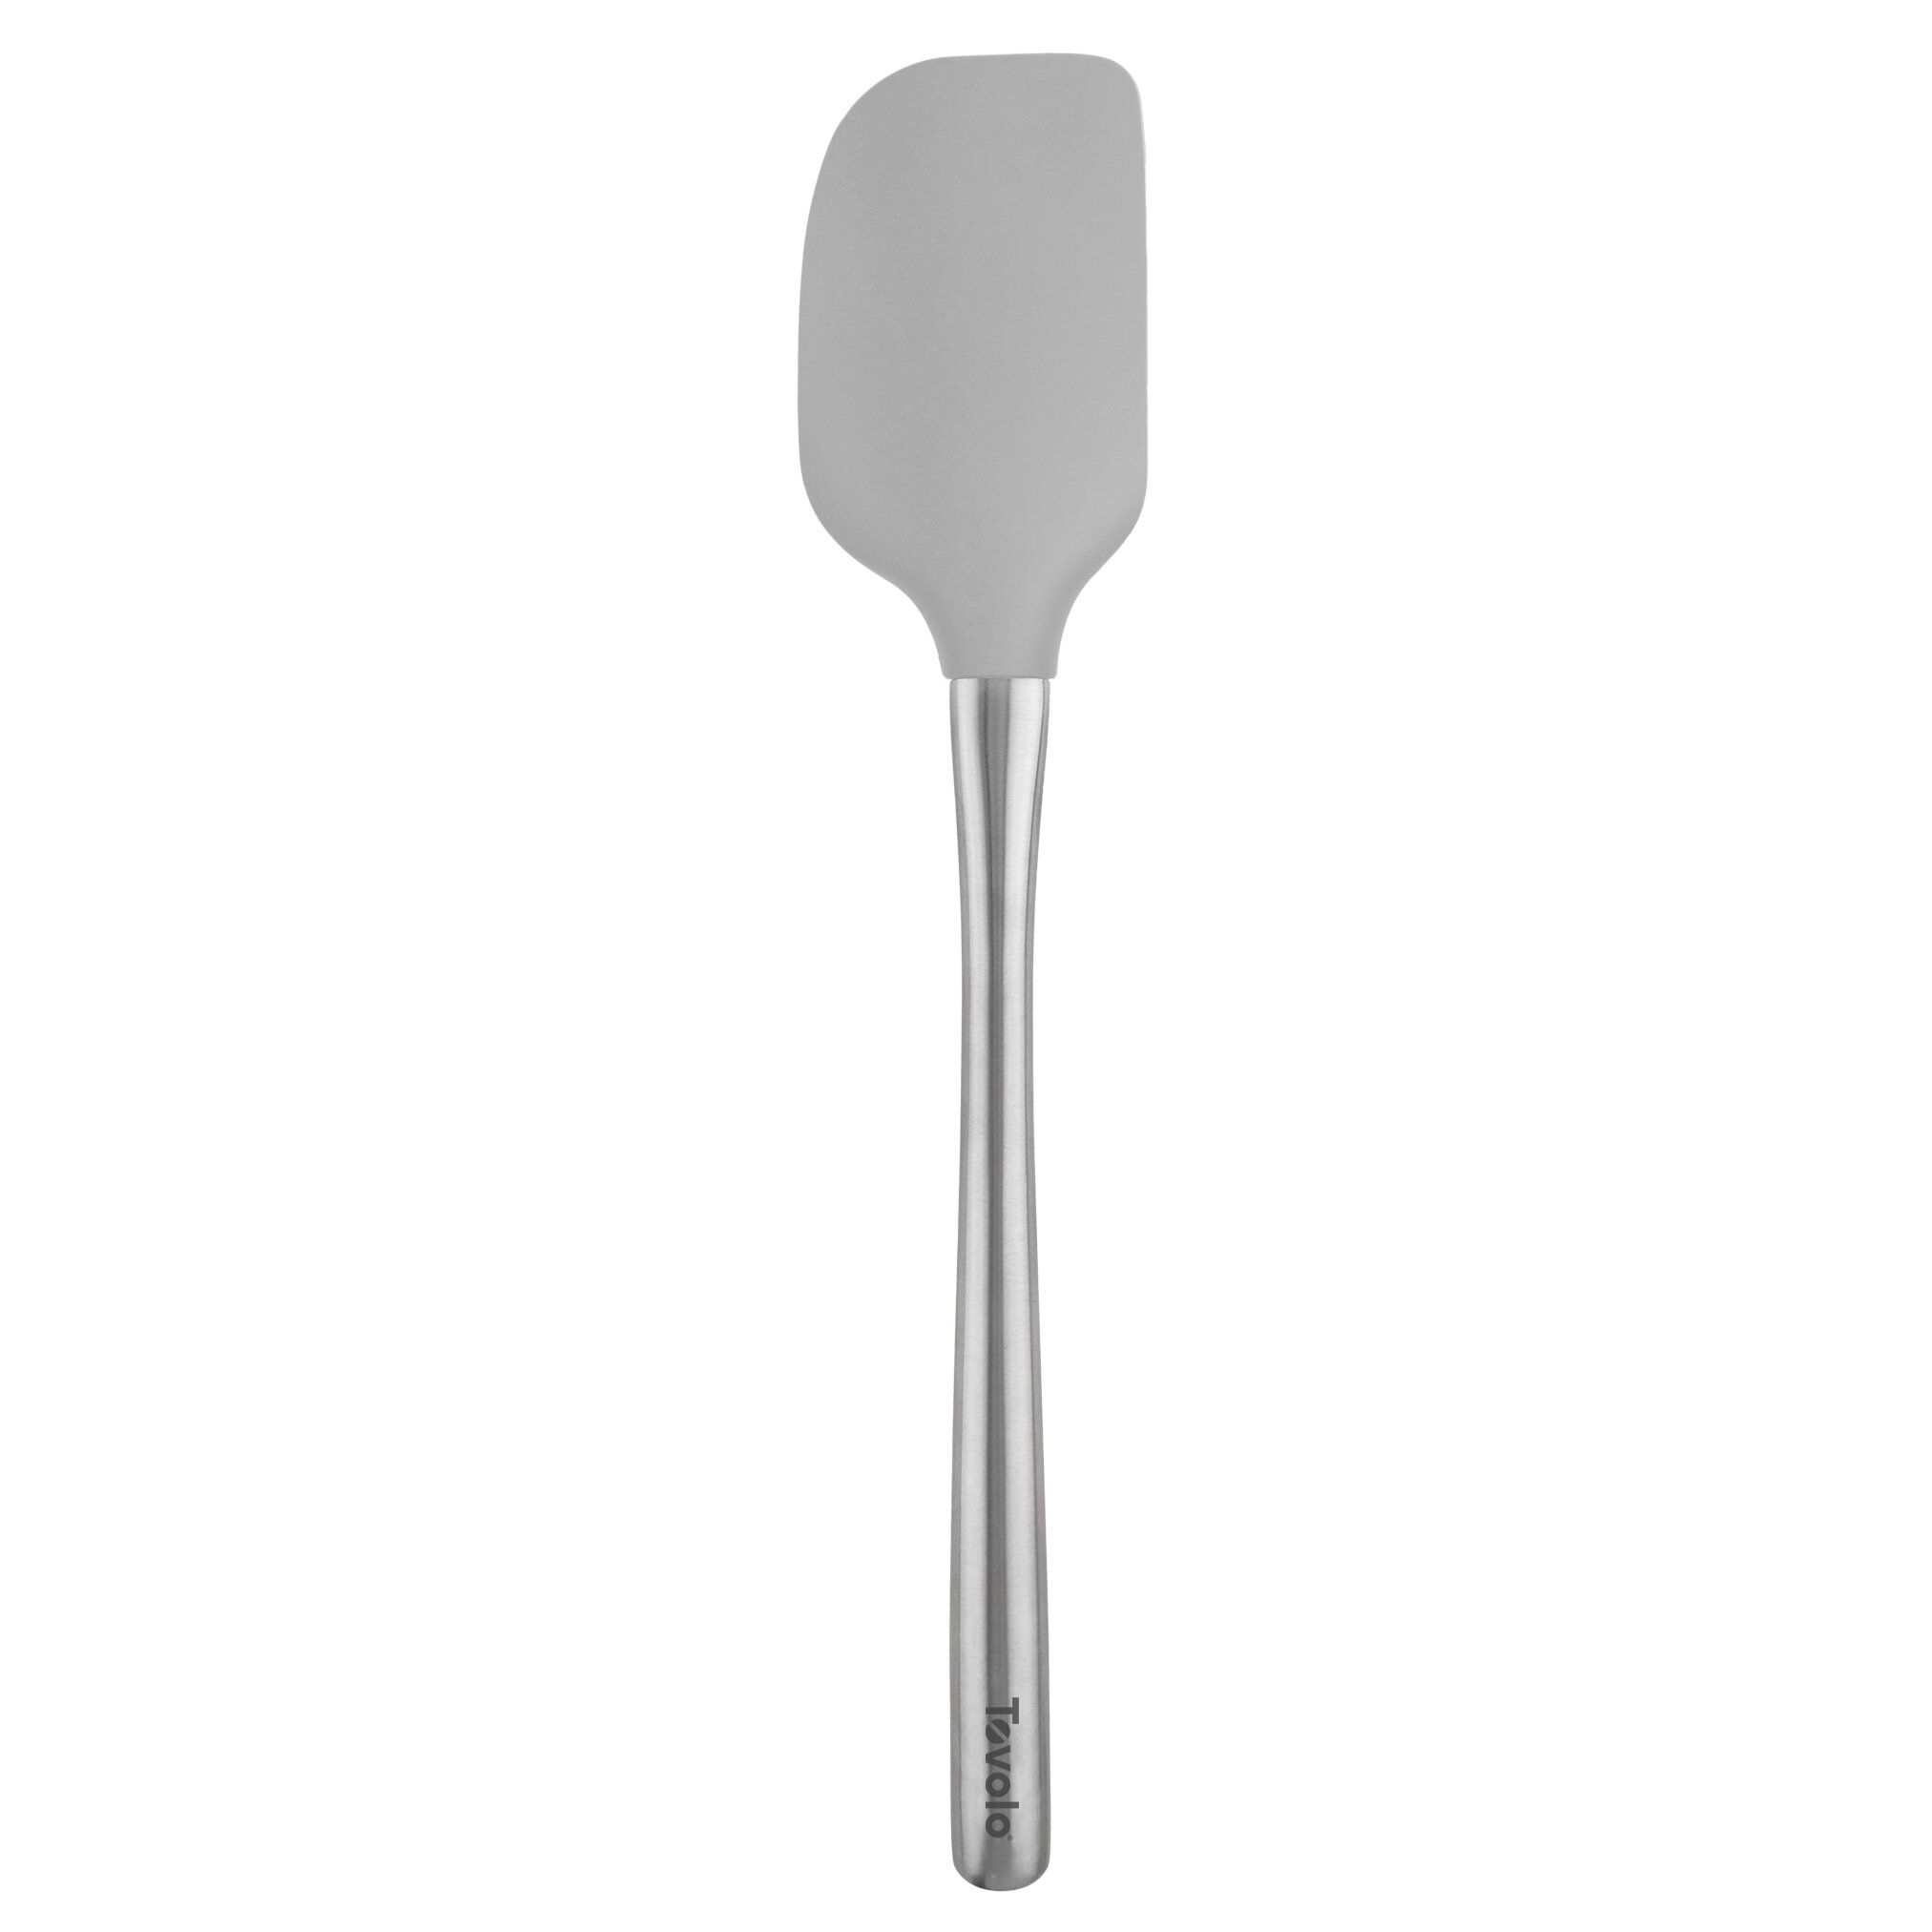 Tovolo 5pc Silicone and Stainless Handle Spatula Set White